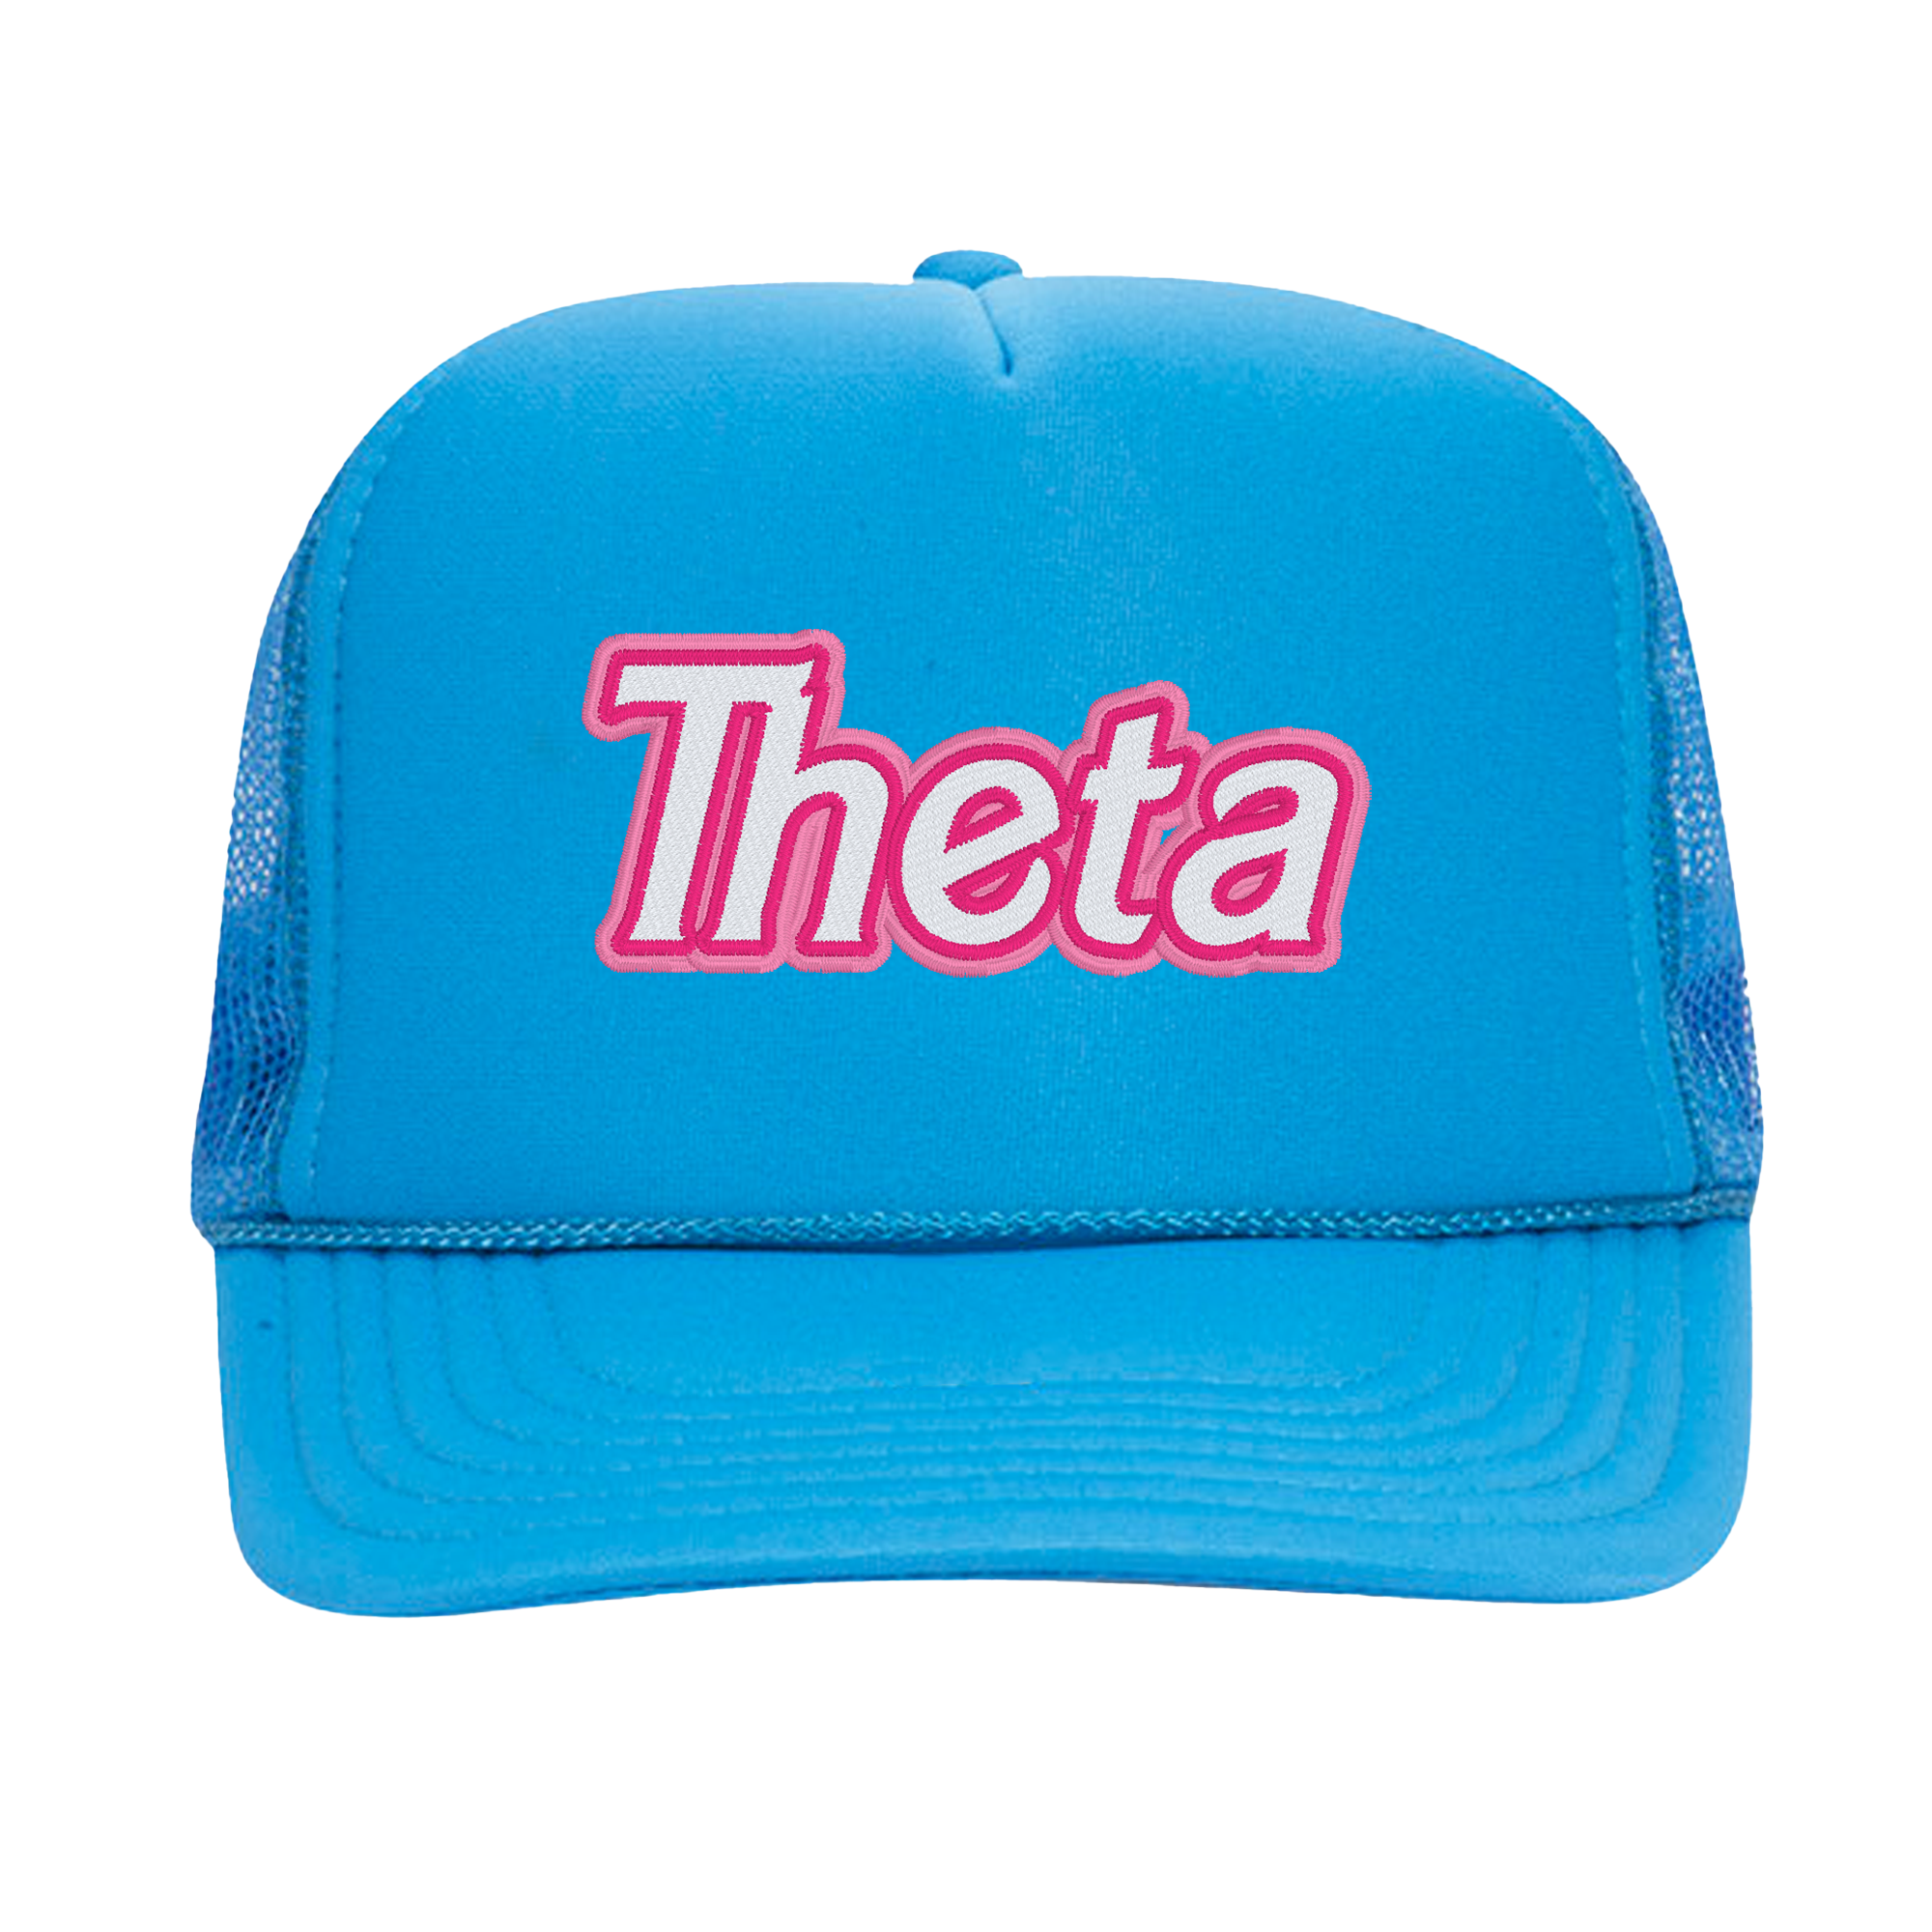 a blue hat with the word theta printed on it